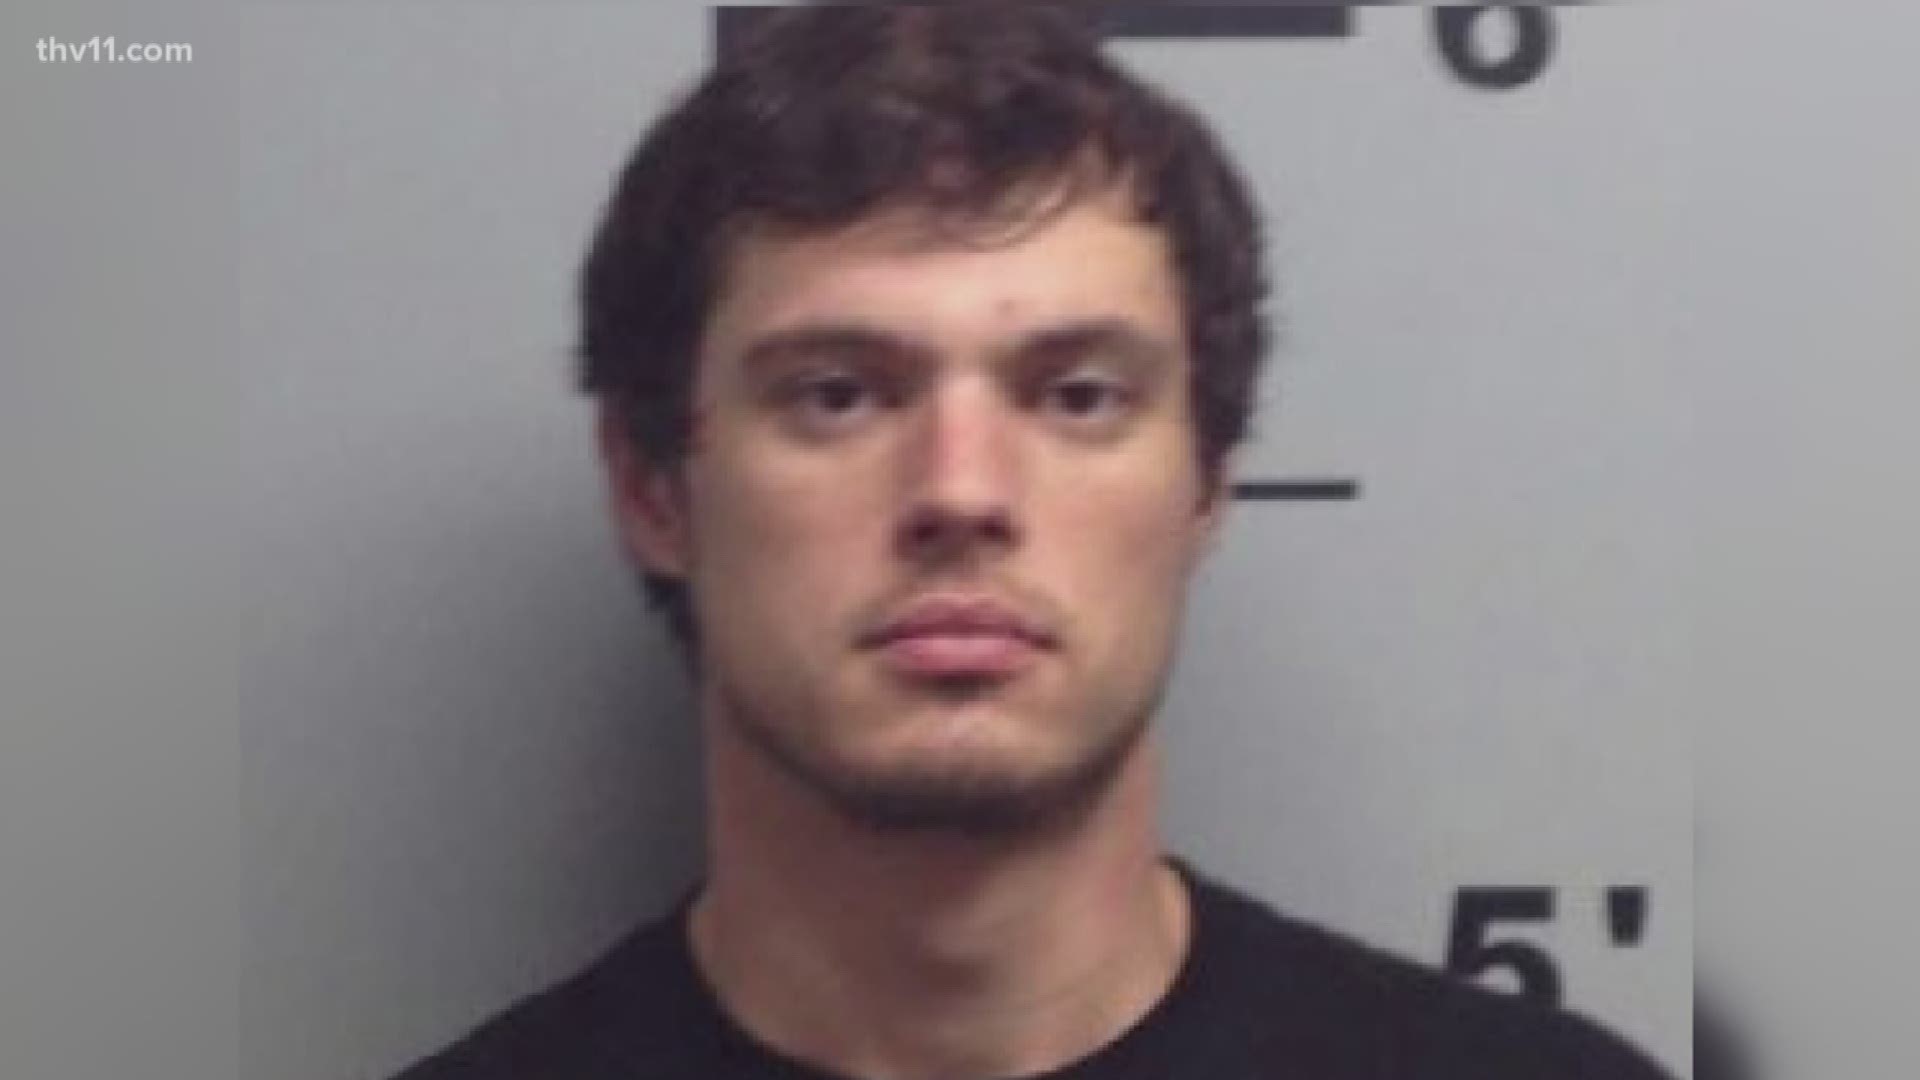 The son of U.S. Rep. Steve Womack, R.-Ark., was arrested Wednesday on 11 charges, including several related to drugs and firearms.